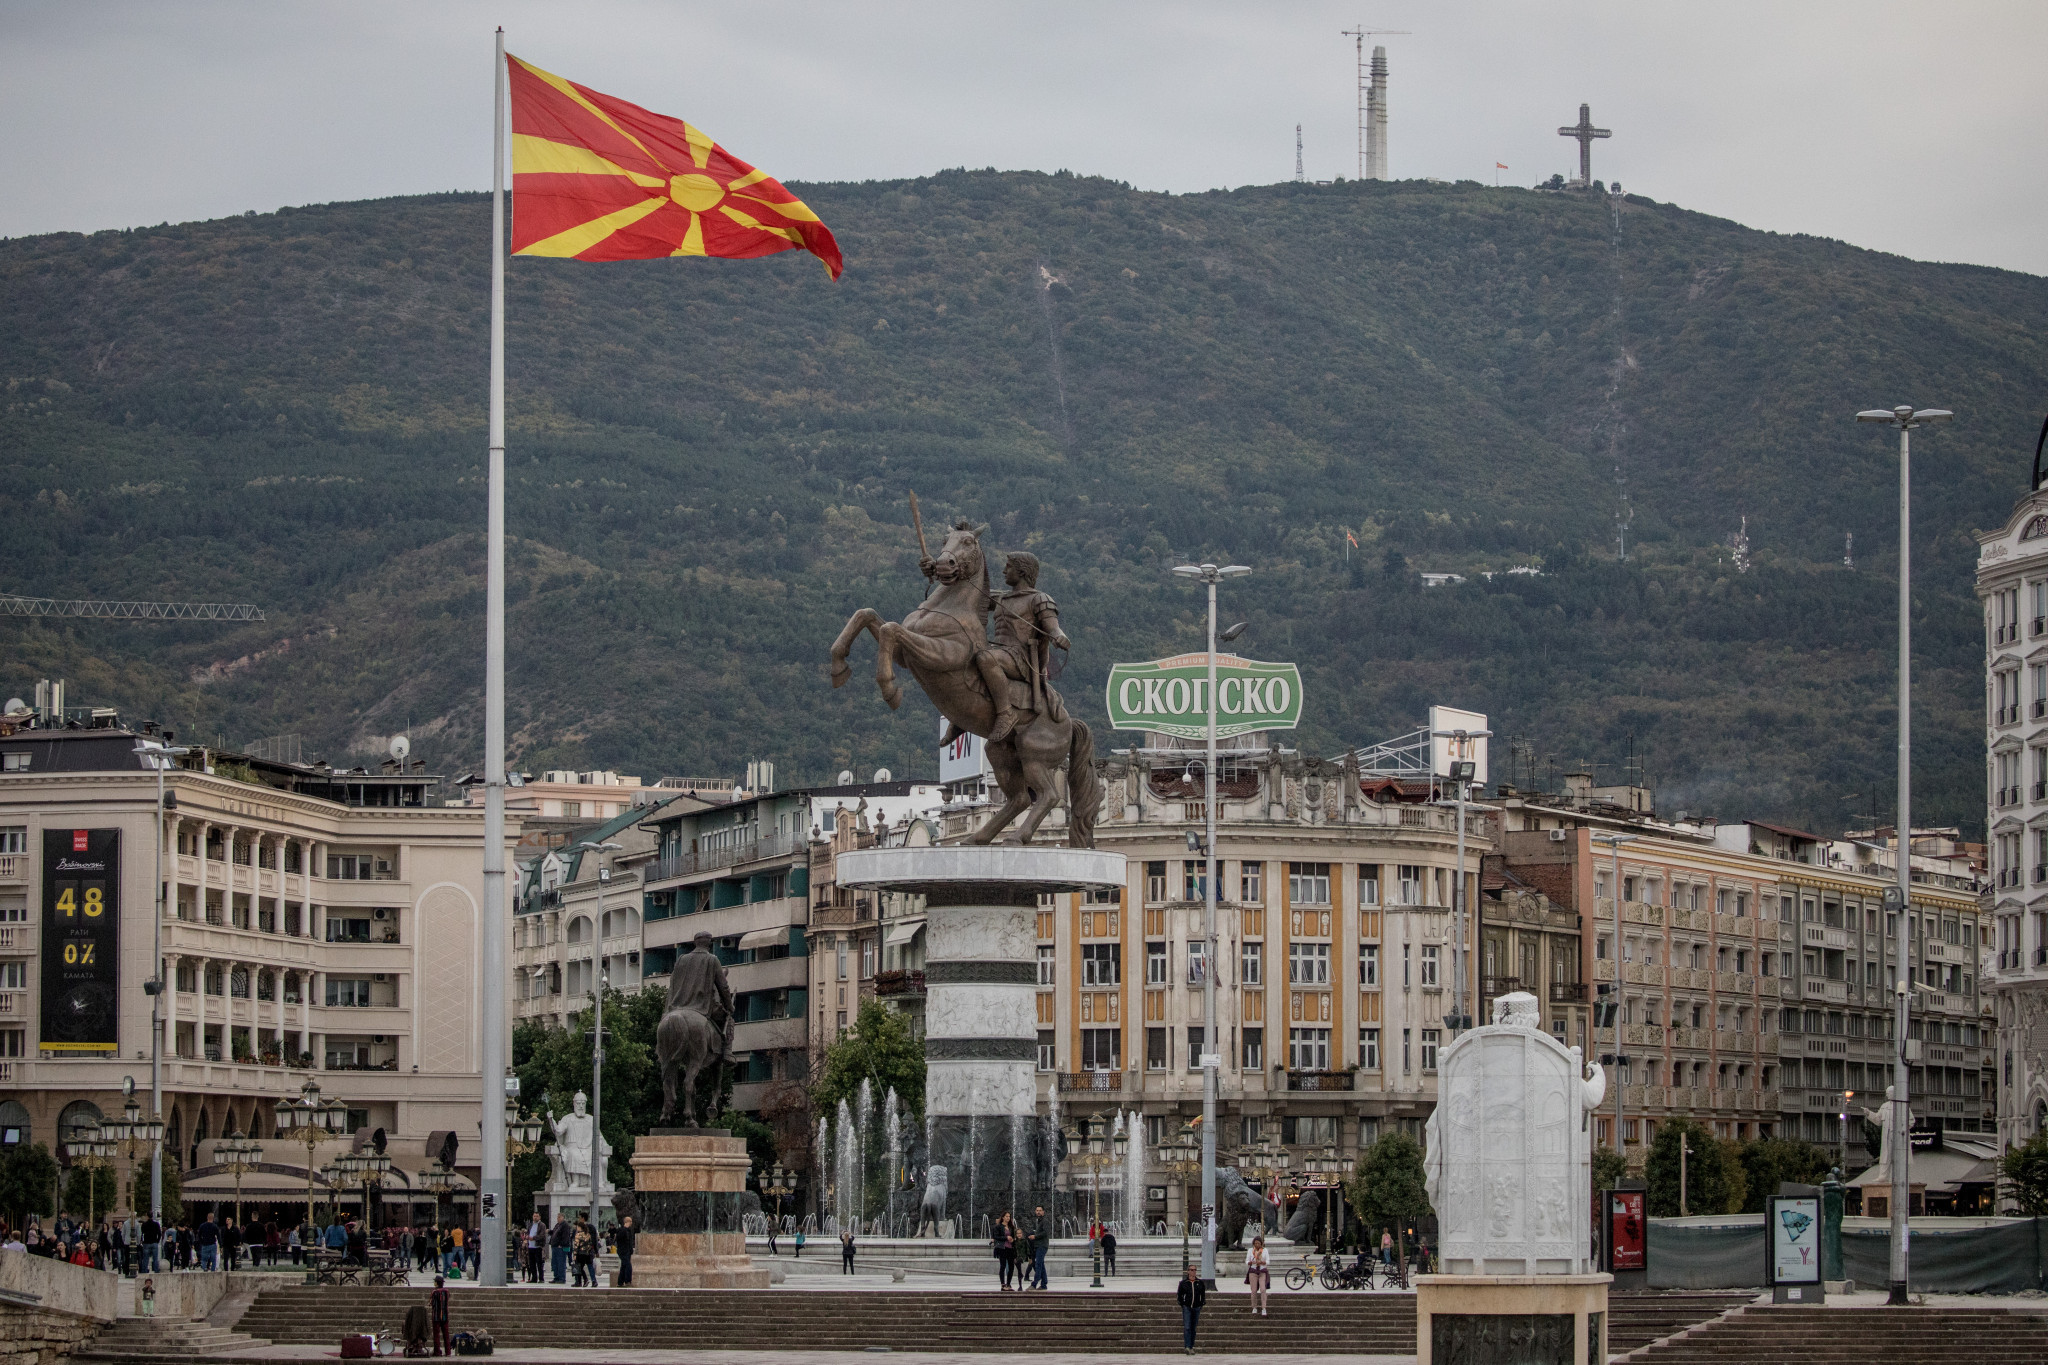 Skopje is looking to stage a future edition of EYOF following its hosting of the EOC General Assembly last year ©Getty Images